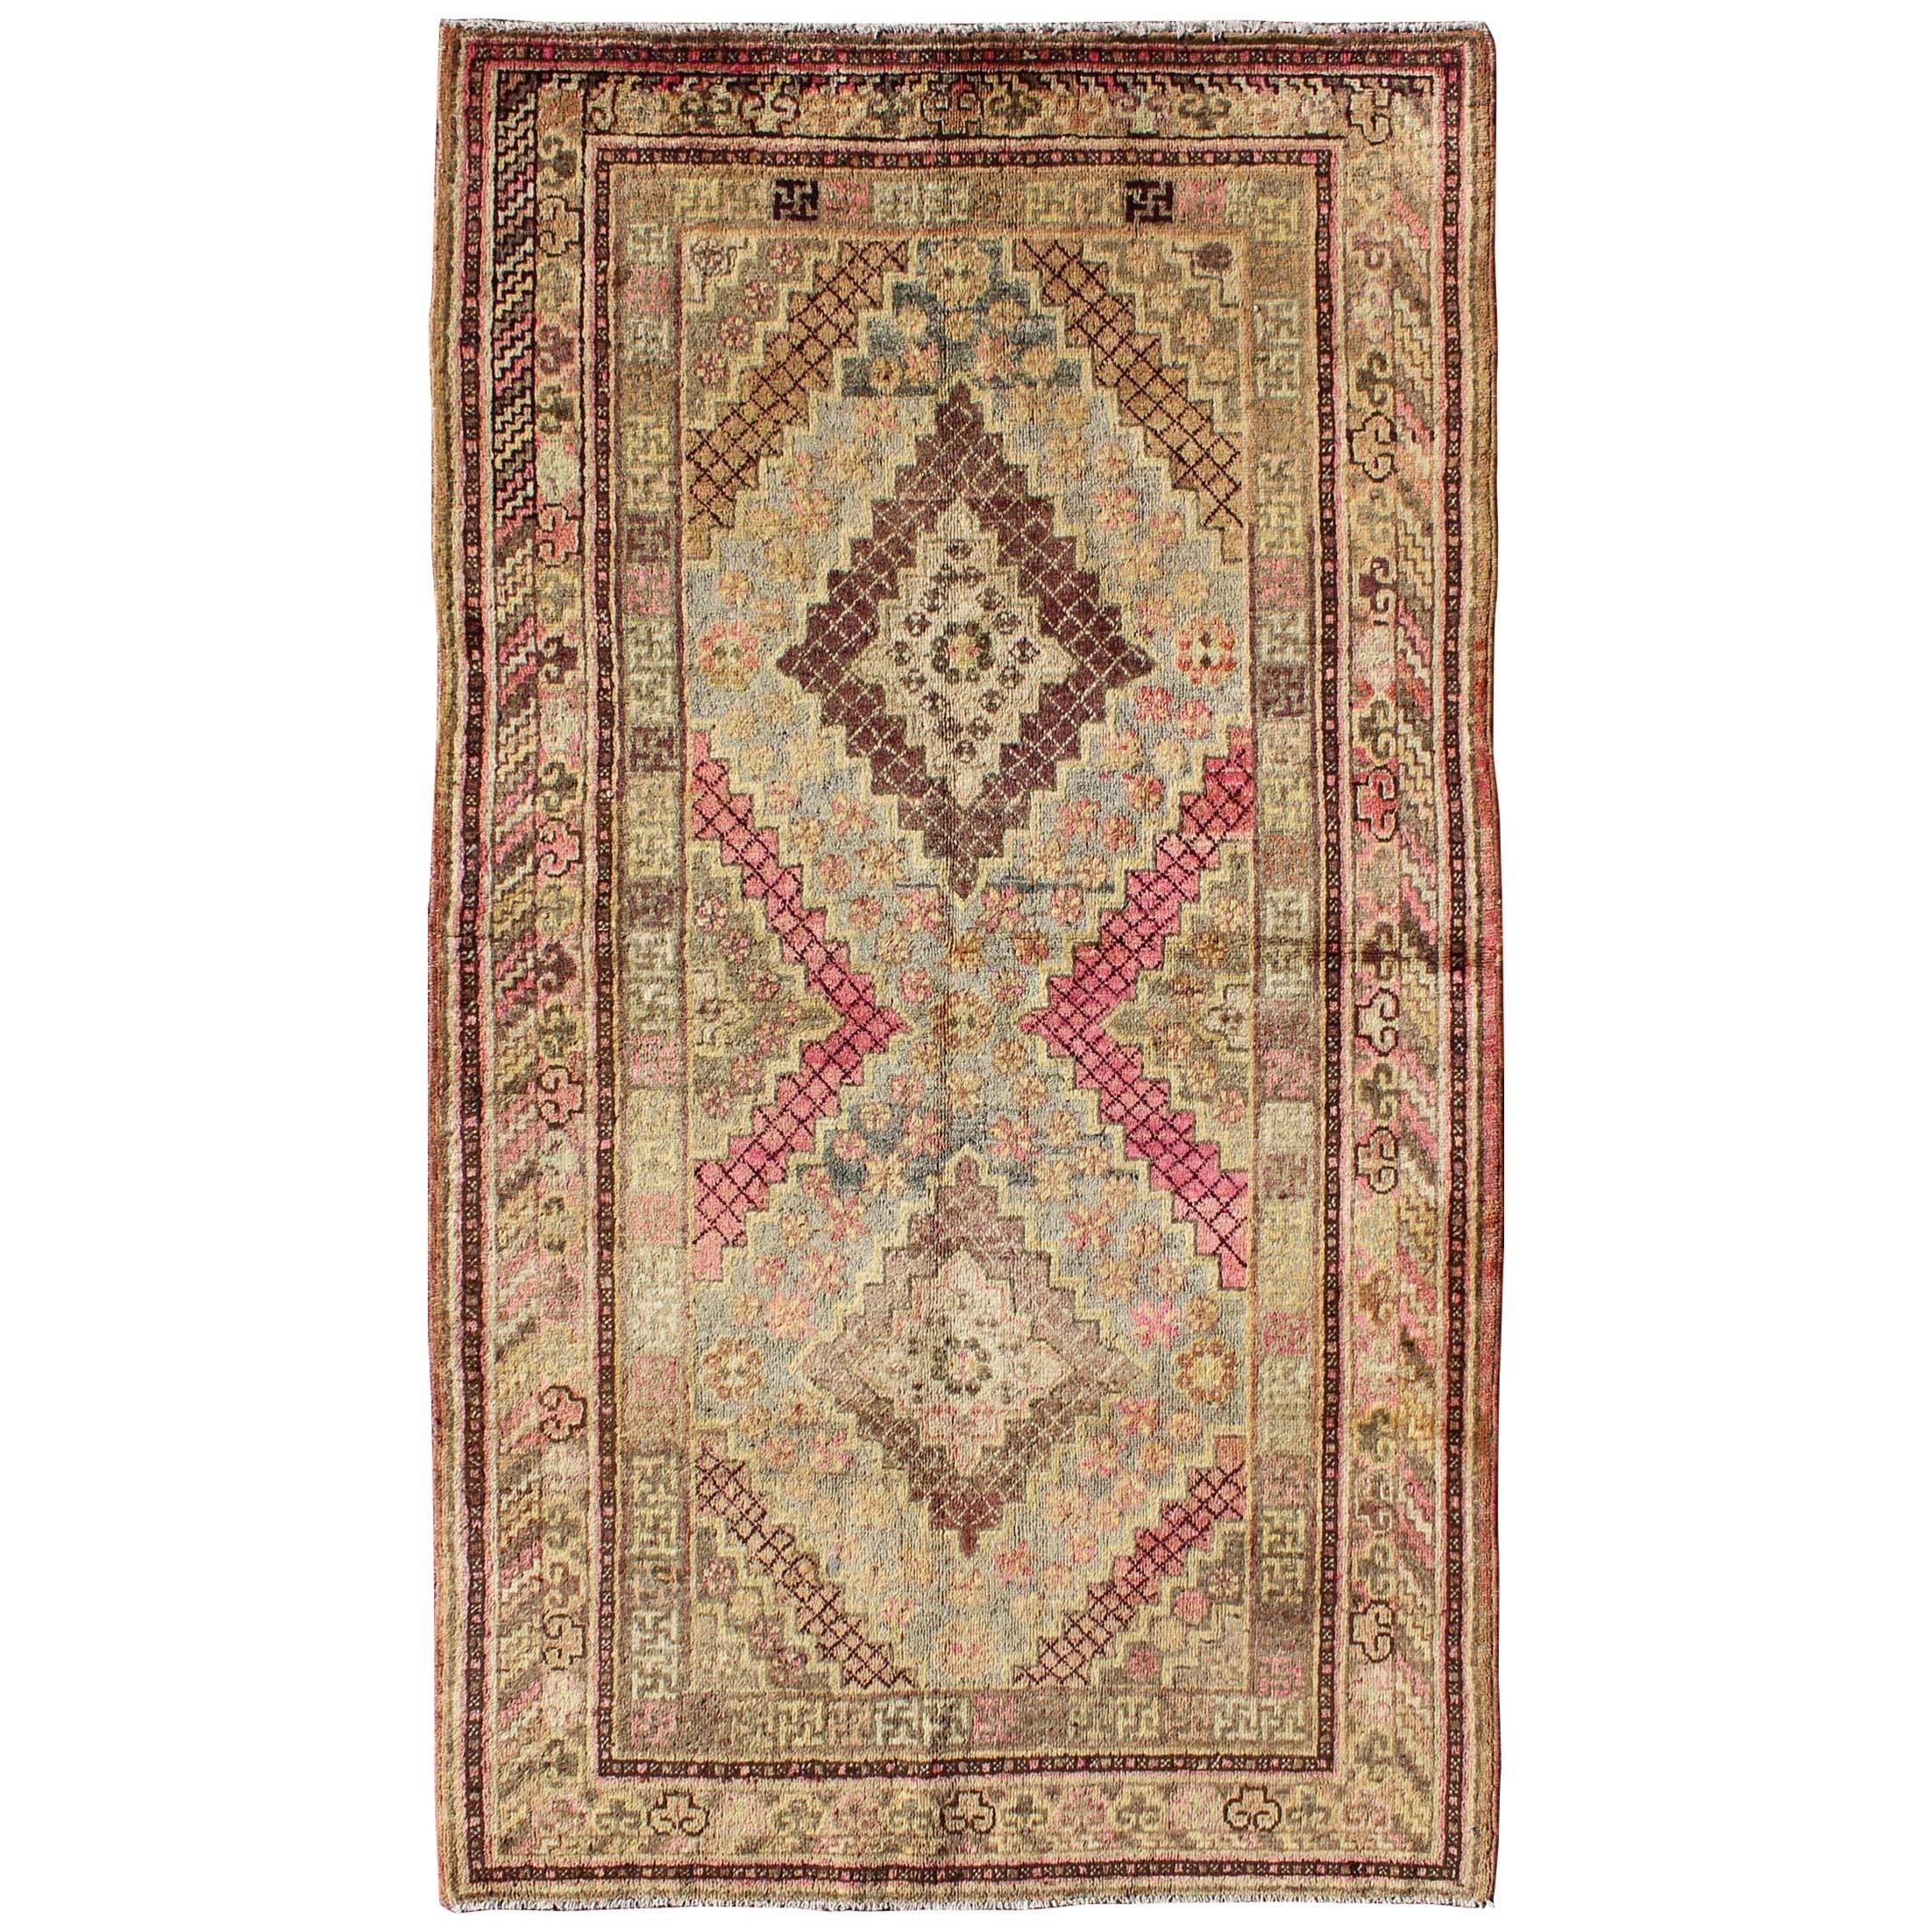 Early 20th Century Antique Khotan Rug with Paired Diamond Medallions in Wine Red